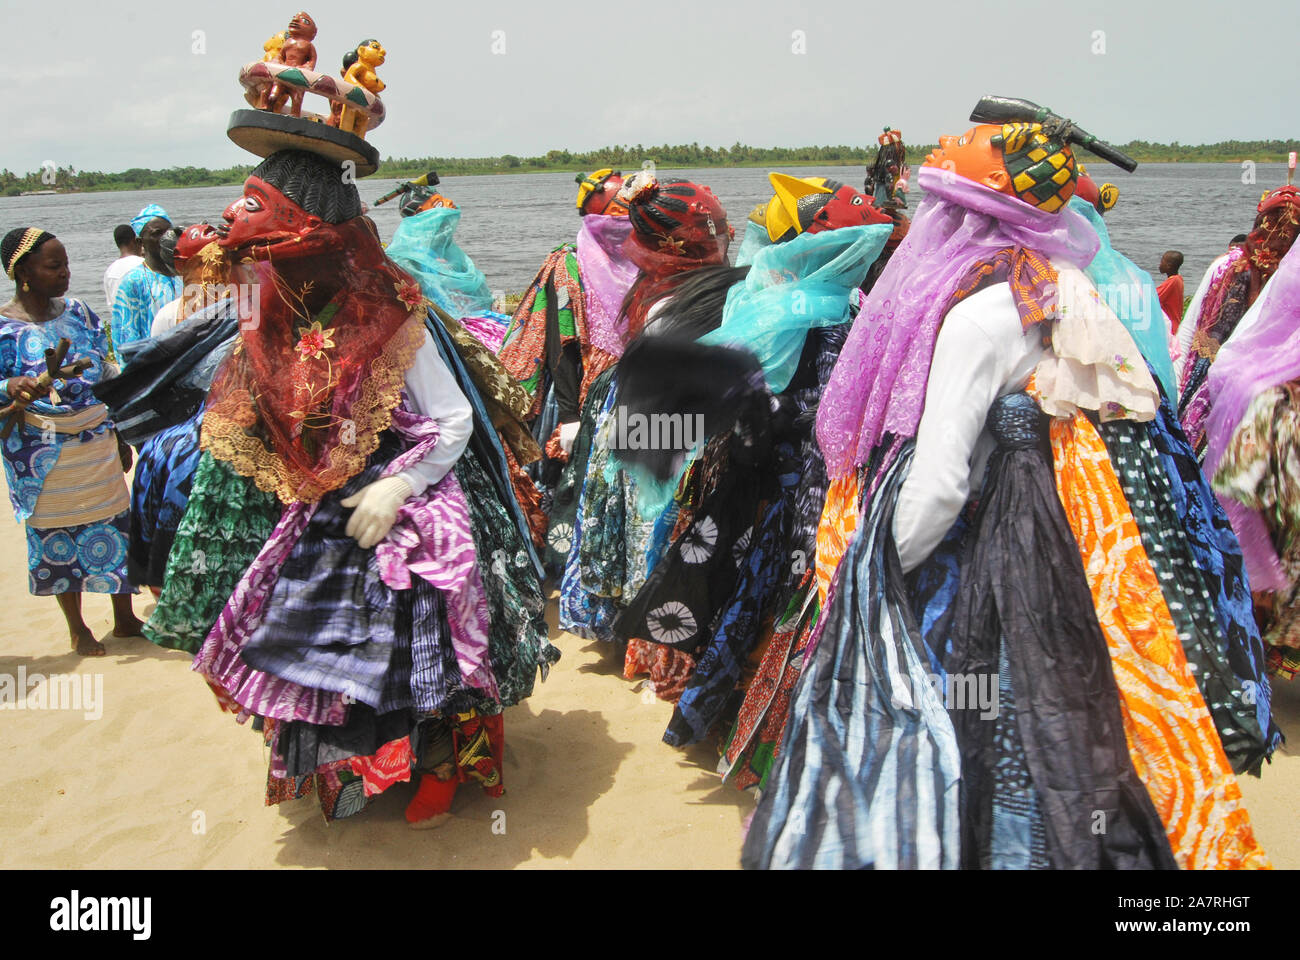 Men in Gelede Masks dancing to the beat of the spirit during the annual Lagos Black Heritage festival at the historical Slave Trade of Badagry Beach, Lagos Nigeria. Gelede Masquerades are being celebrated in South West Nigeria for ritual purposes and entertainment. Stock Photo